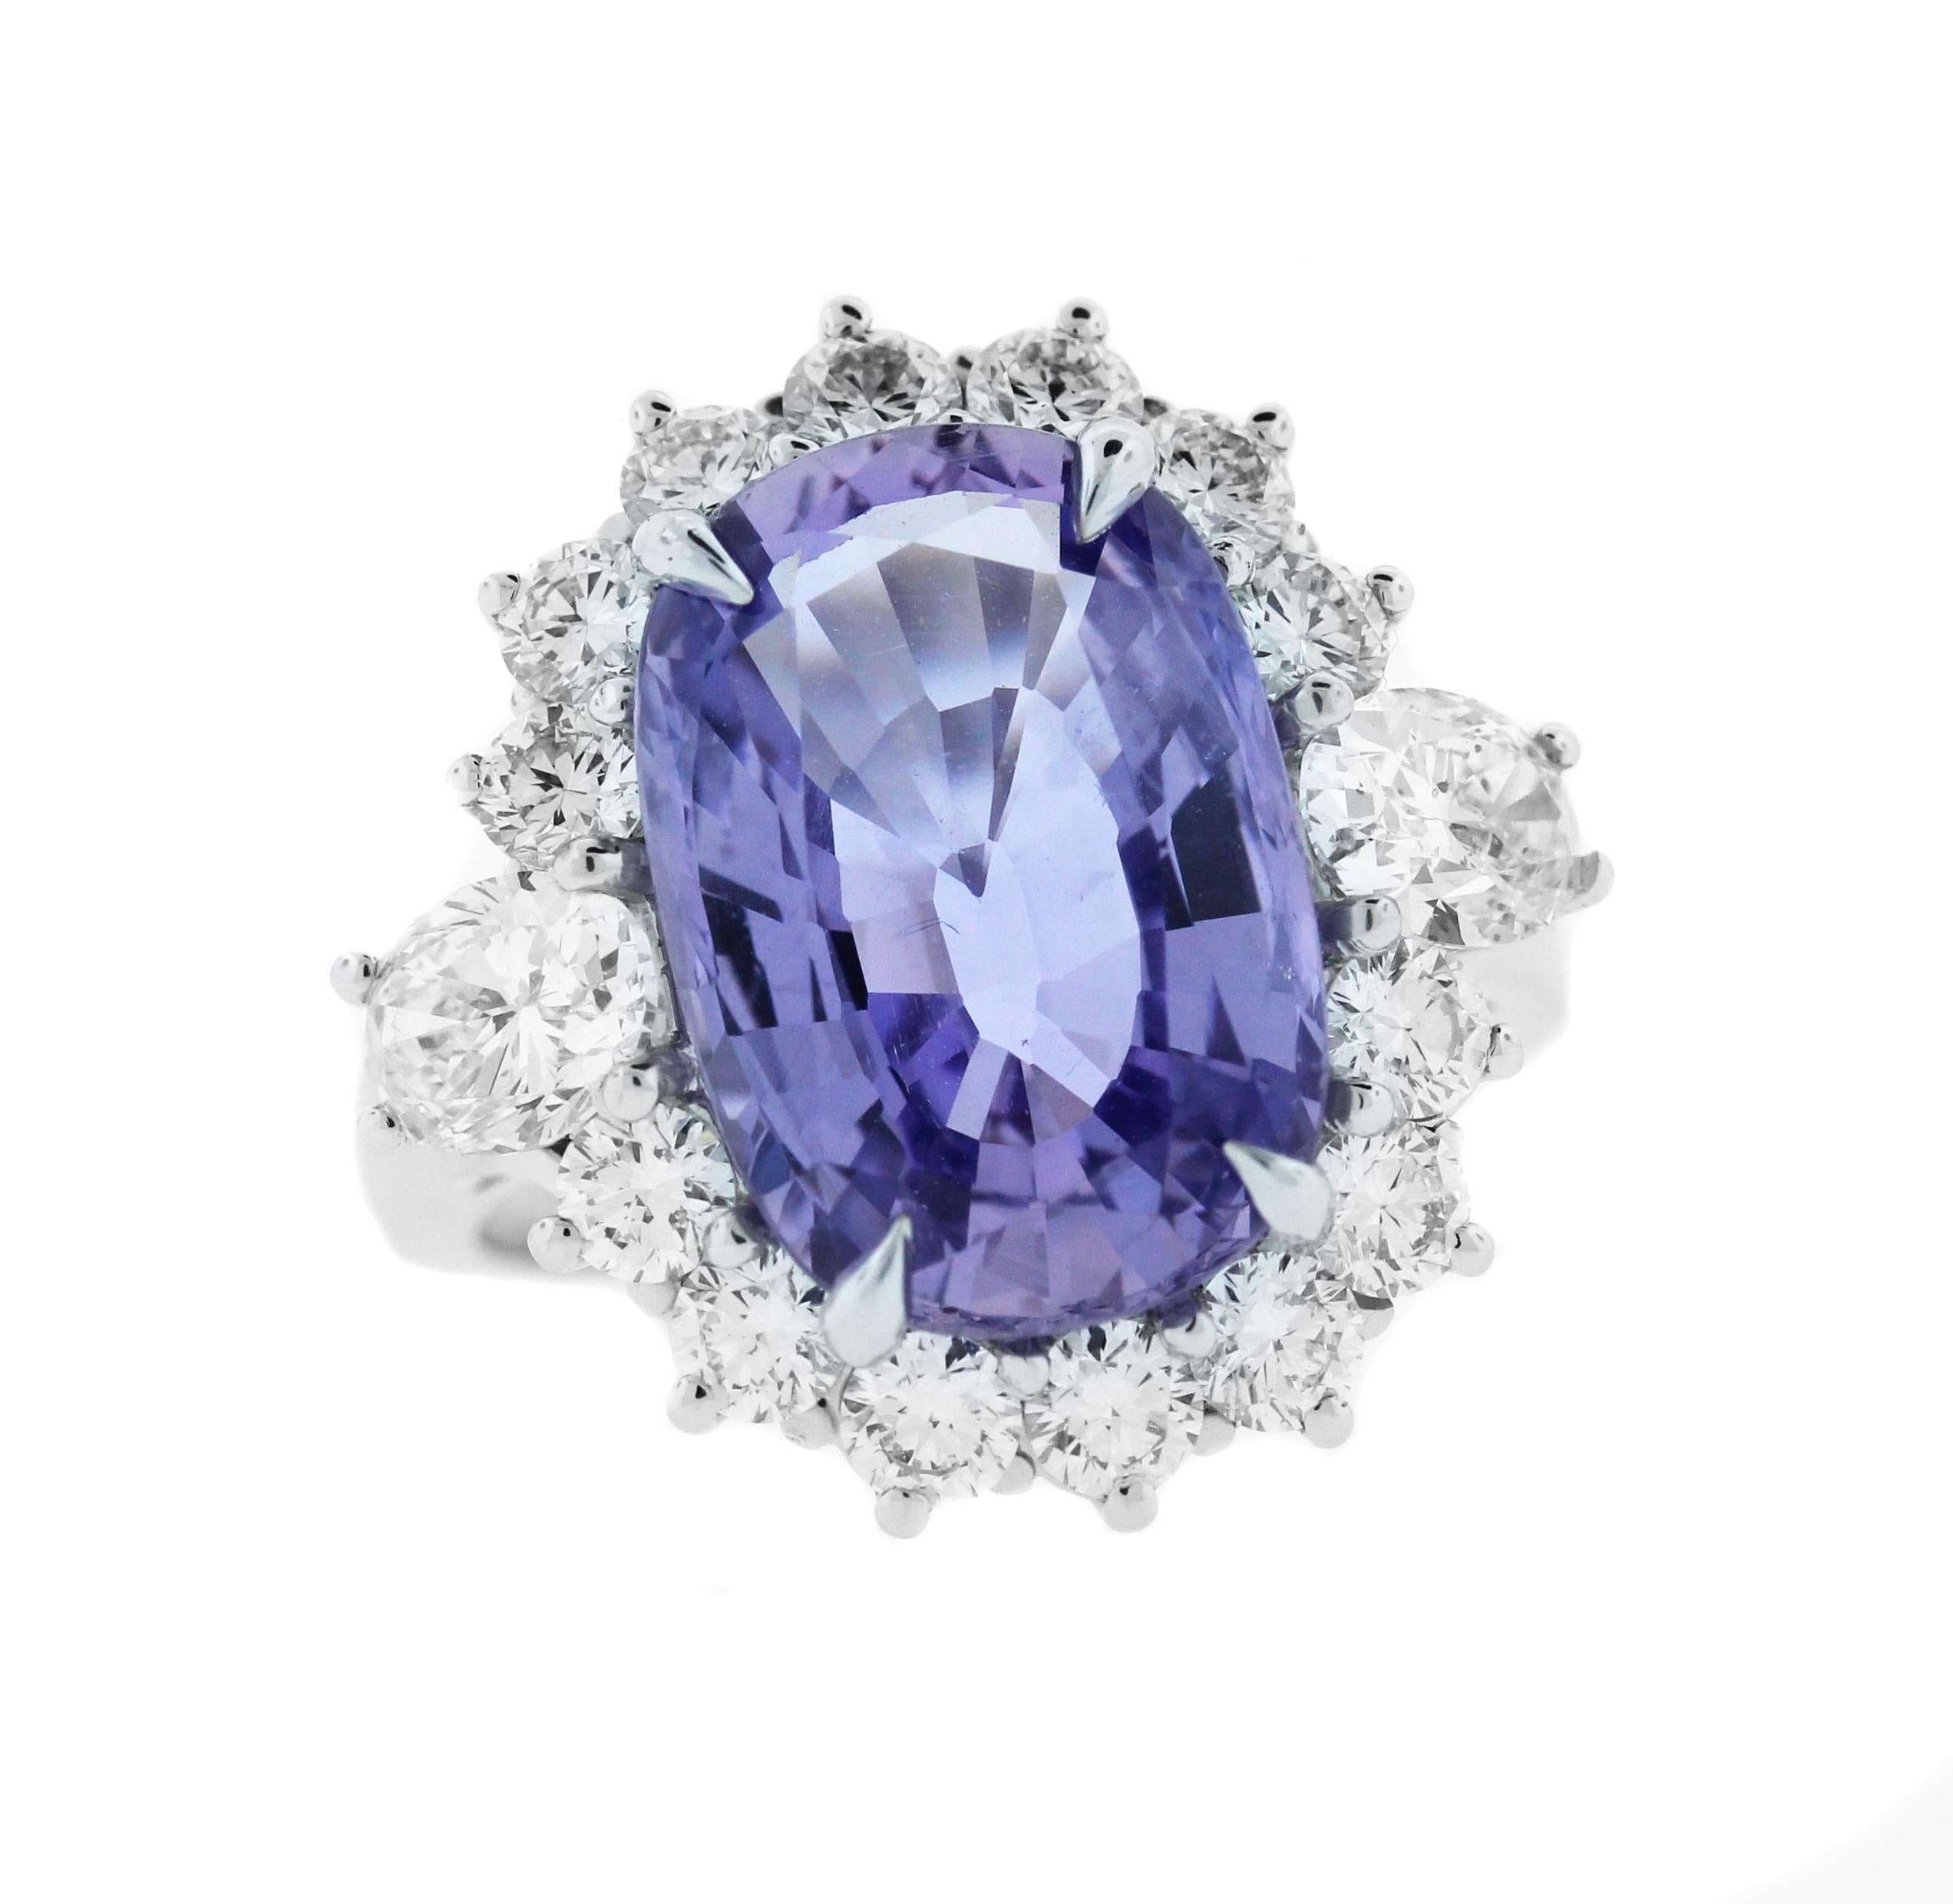 VERY RARE

9.22ct. Natural Violet Purple Sapphire Center 

AGL CERTIFIED. 

Origin: Ceylon. Cushion Cut. 13mm x 7mm. Has Heat enhancement. 

Apprx. 3.20ct. G Color, VS Diamonds

Ring is done in platinum, 13.06 grams

Face of ring is 0.8 inches